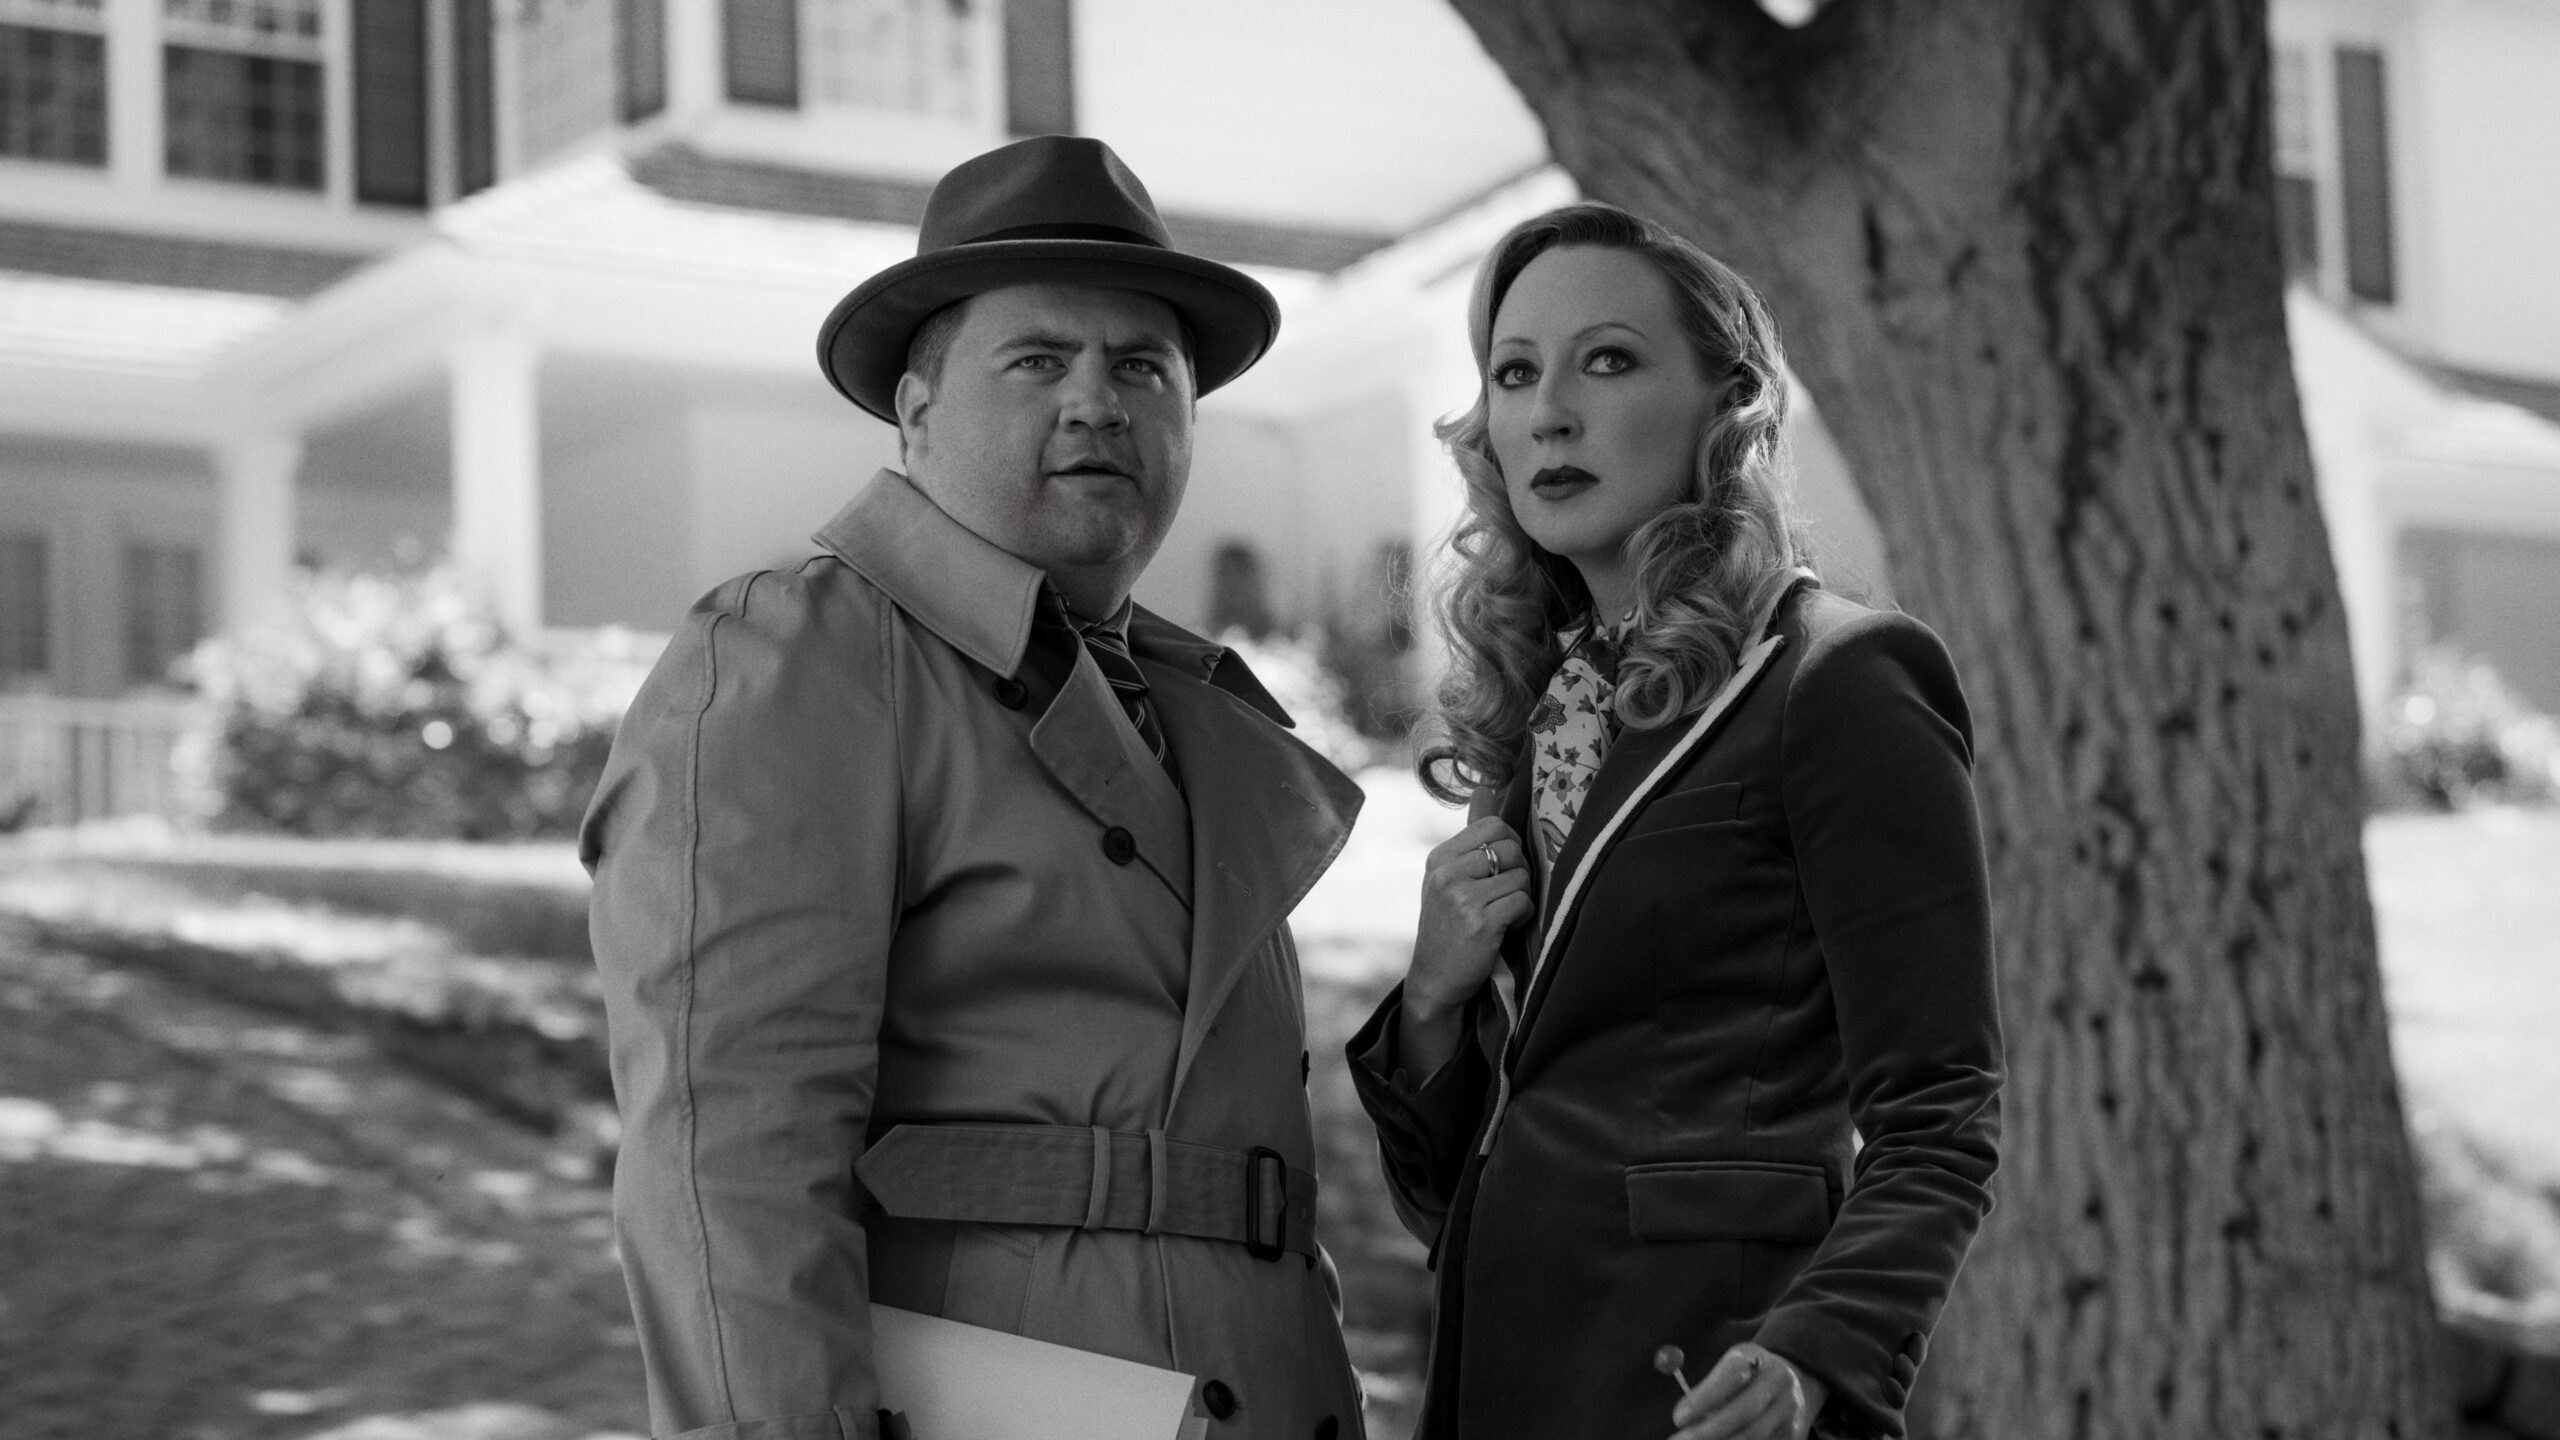 A man in a trenchcoat and fedora and a woman in a black suit stand together under a tree in a black and white film.